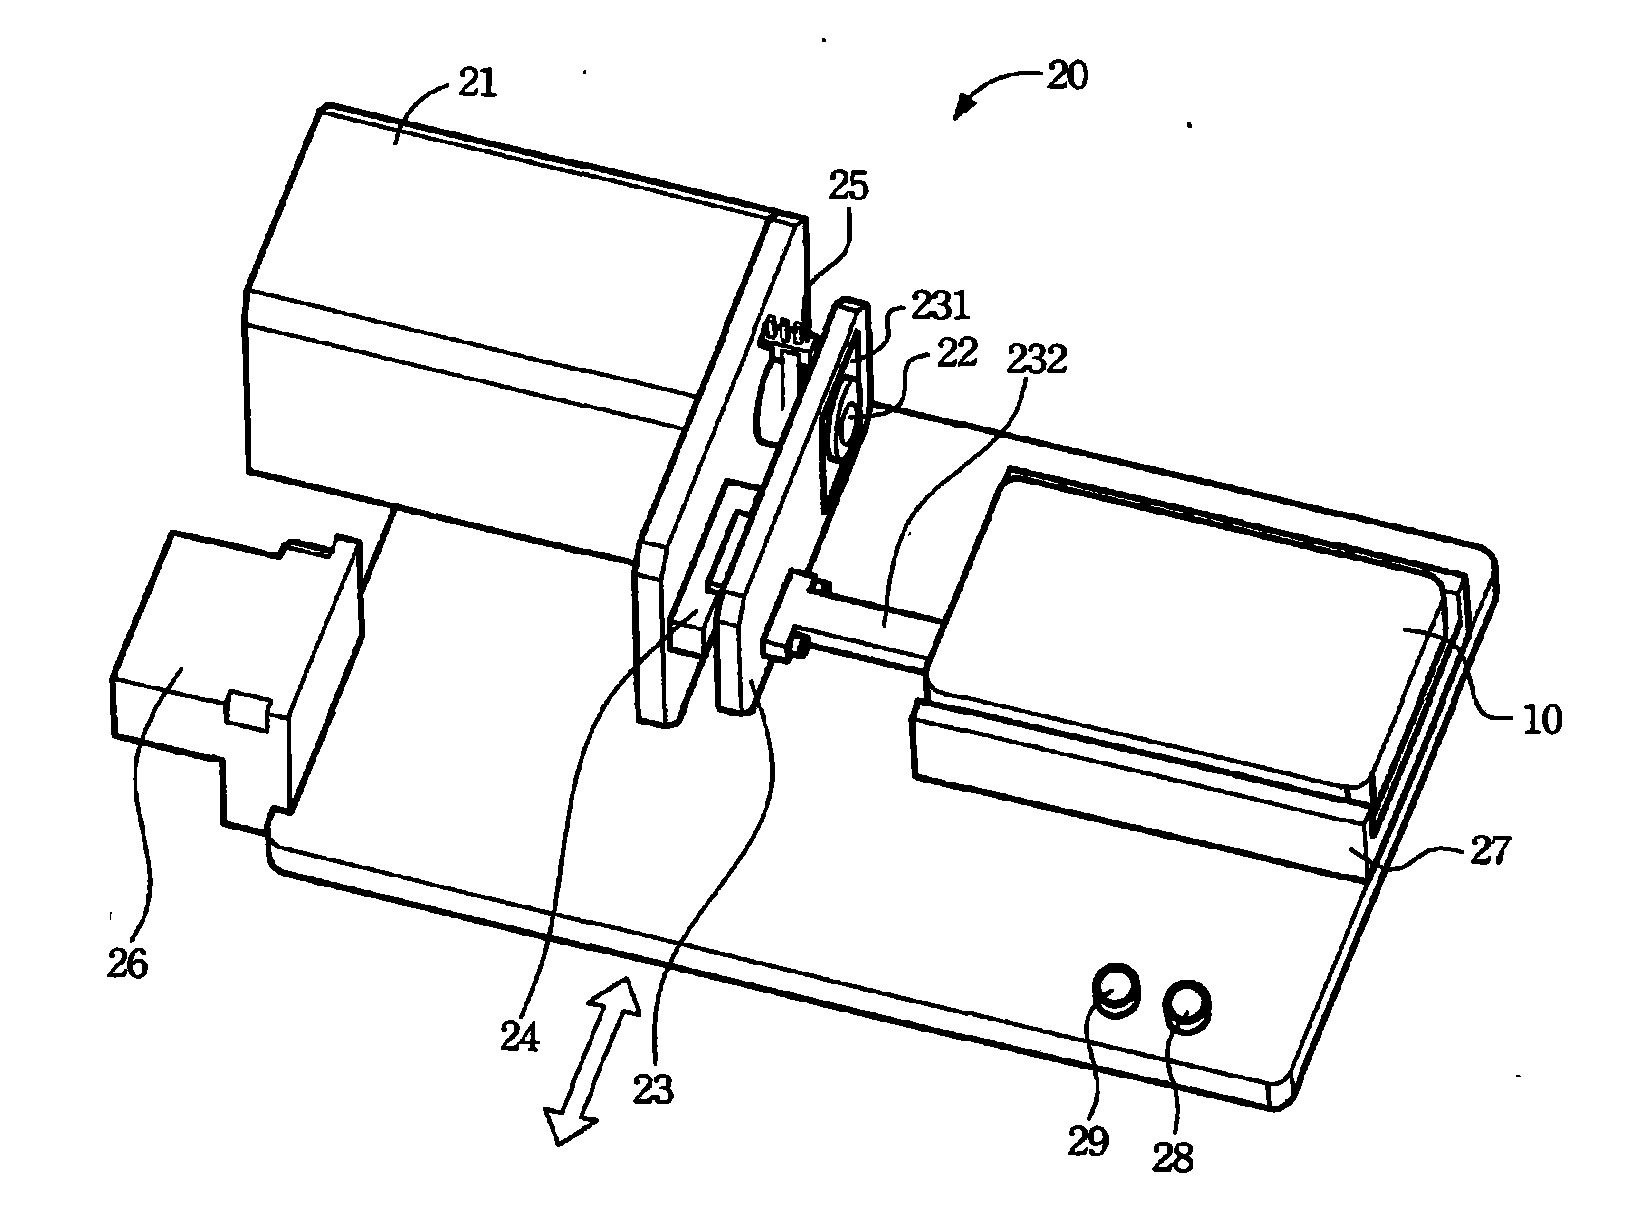 Service life detecting device for switching key